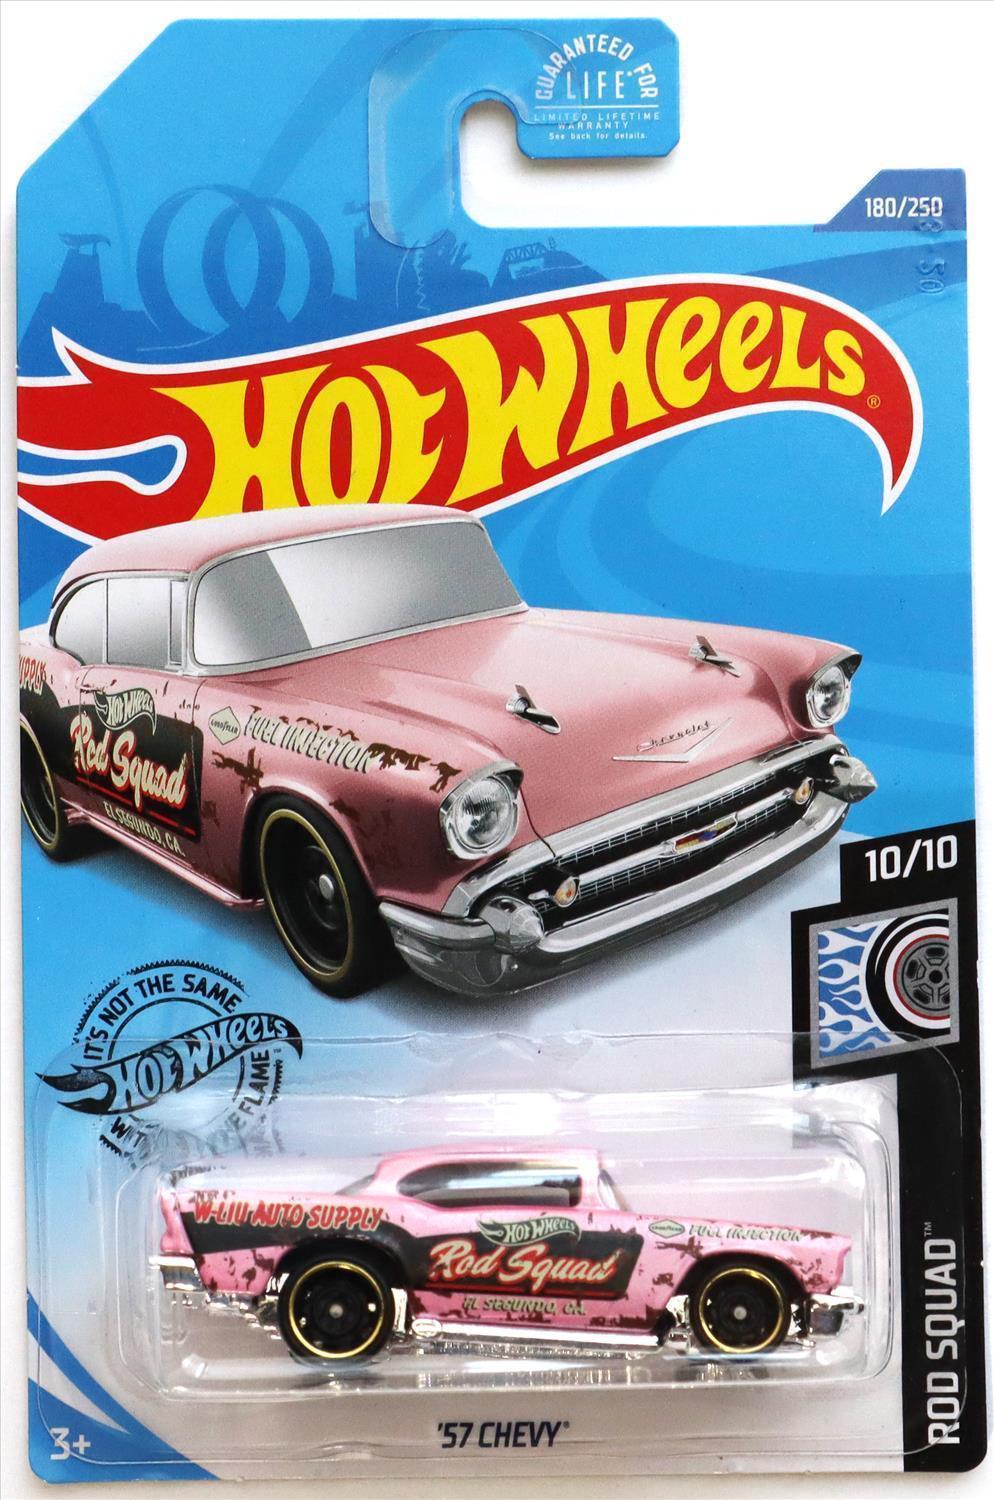 Hot Wheels 2020 - Collector # 180/250 - Rod Squad 10/10 - '57 Chevy - Pink